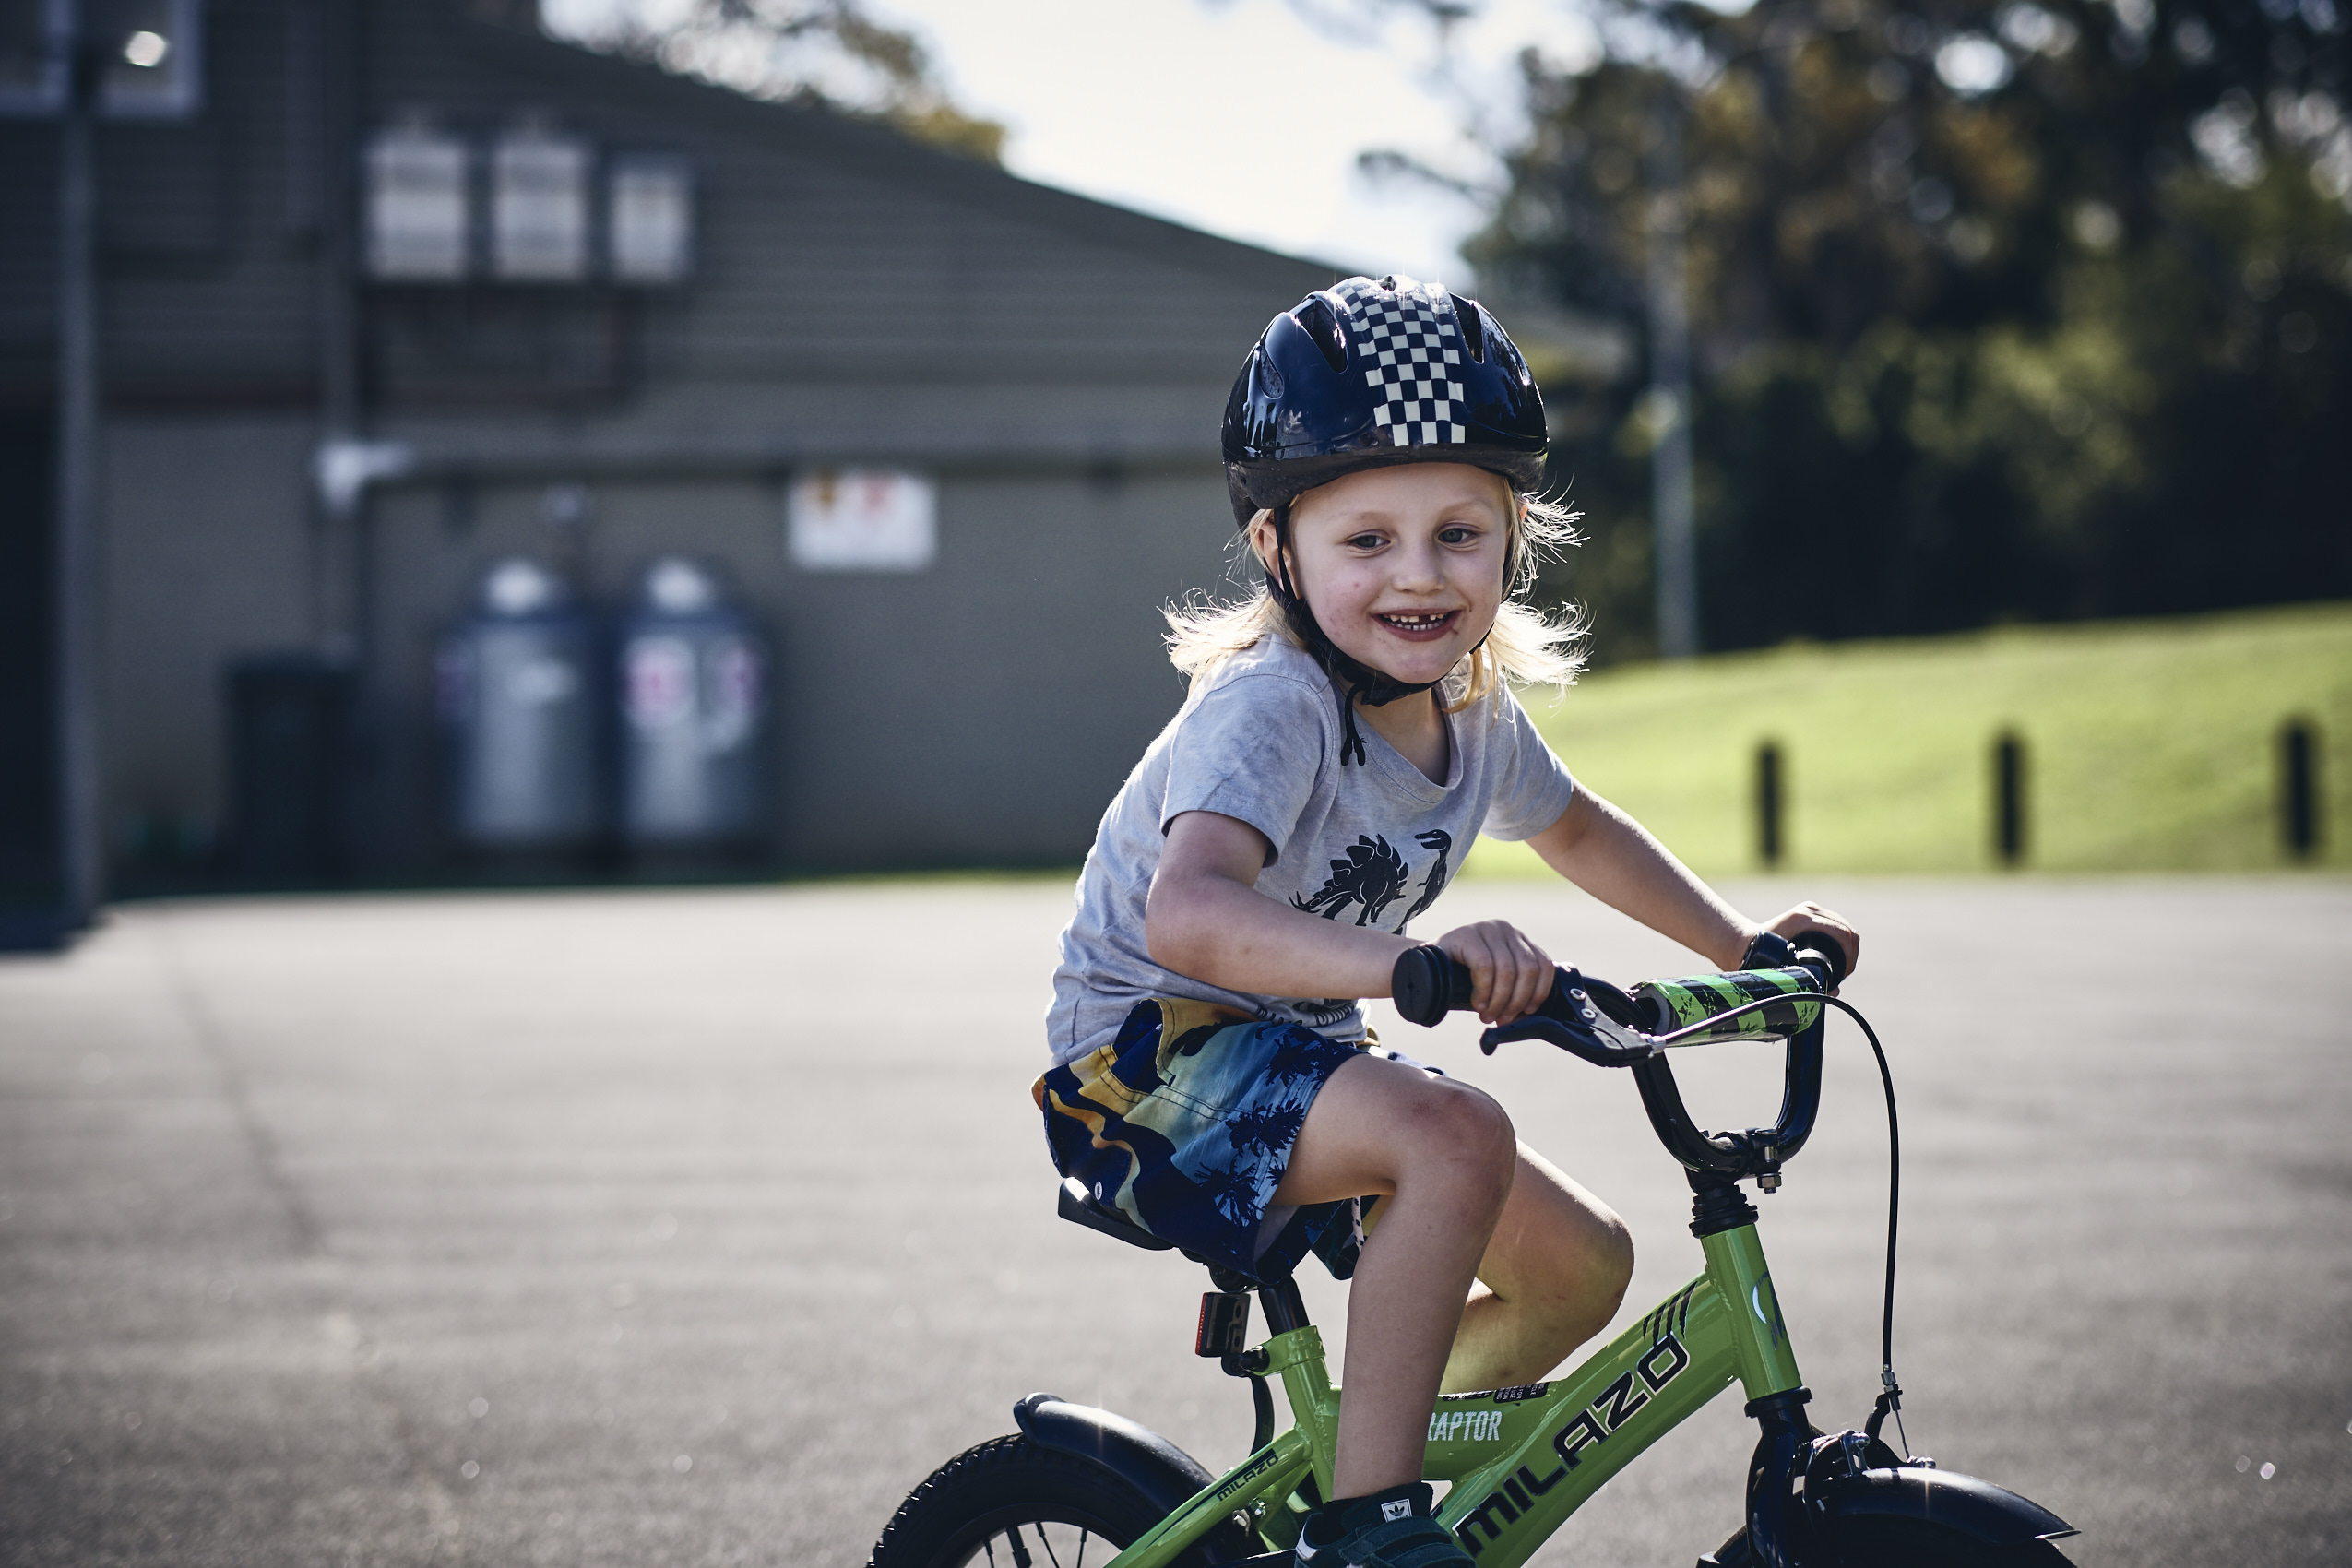 Lockdown • Young Boy Riding Bike During Auckland COVID-19 • Lifestyle & Portrait Photography